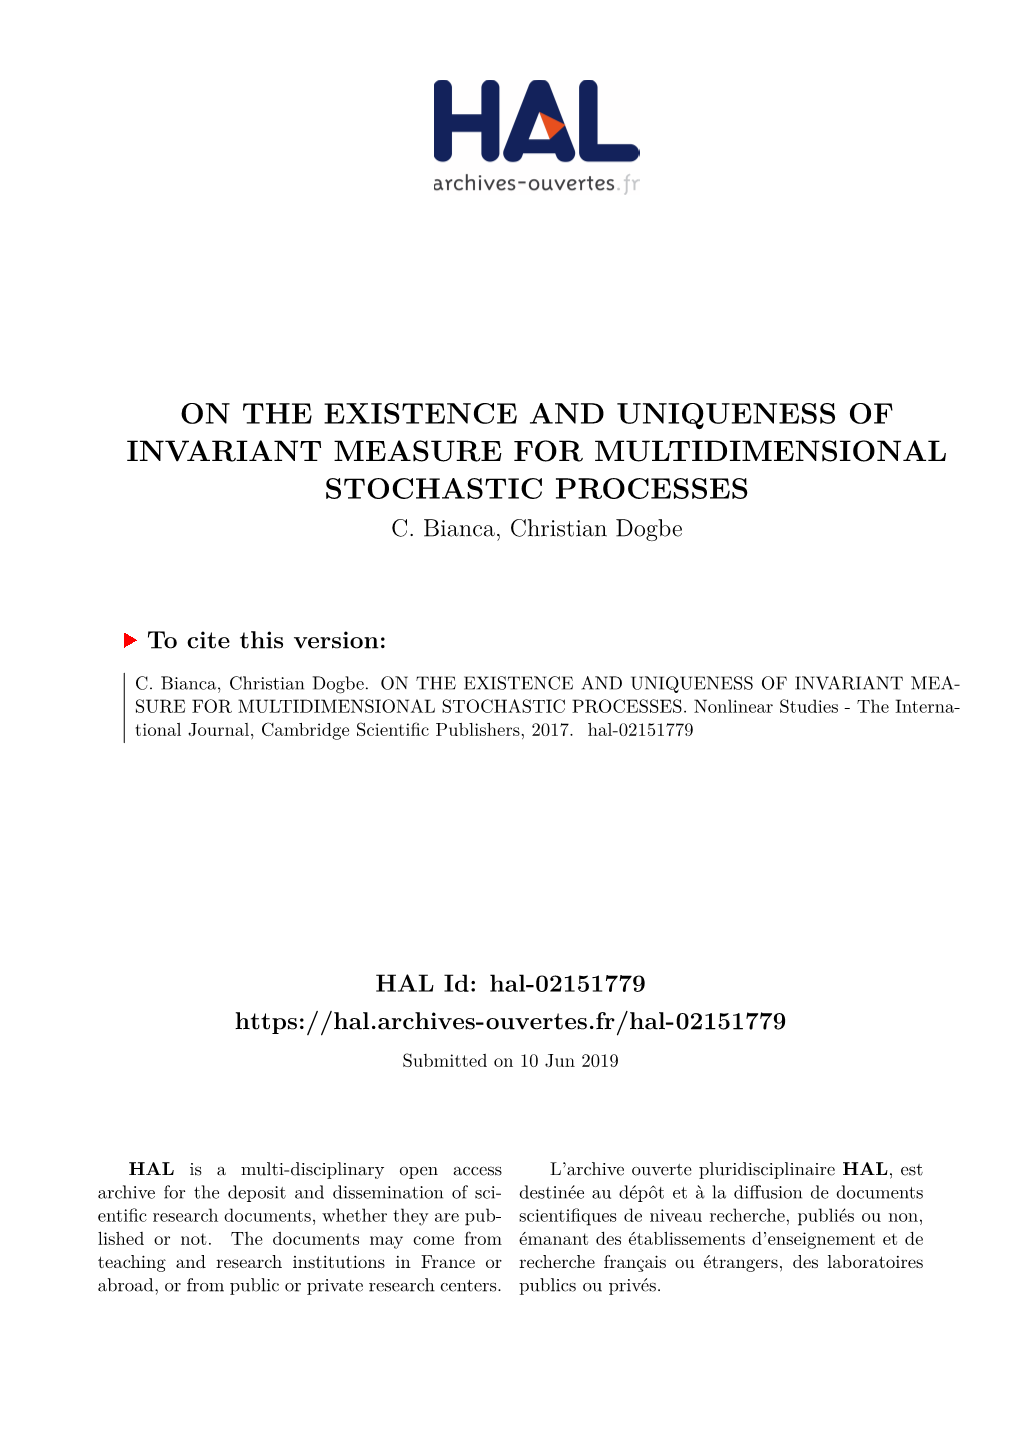 On the Existence and Uniqueness of Invariant Measure for Multidimensional Stochastic Processes C